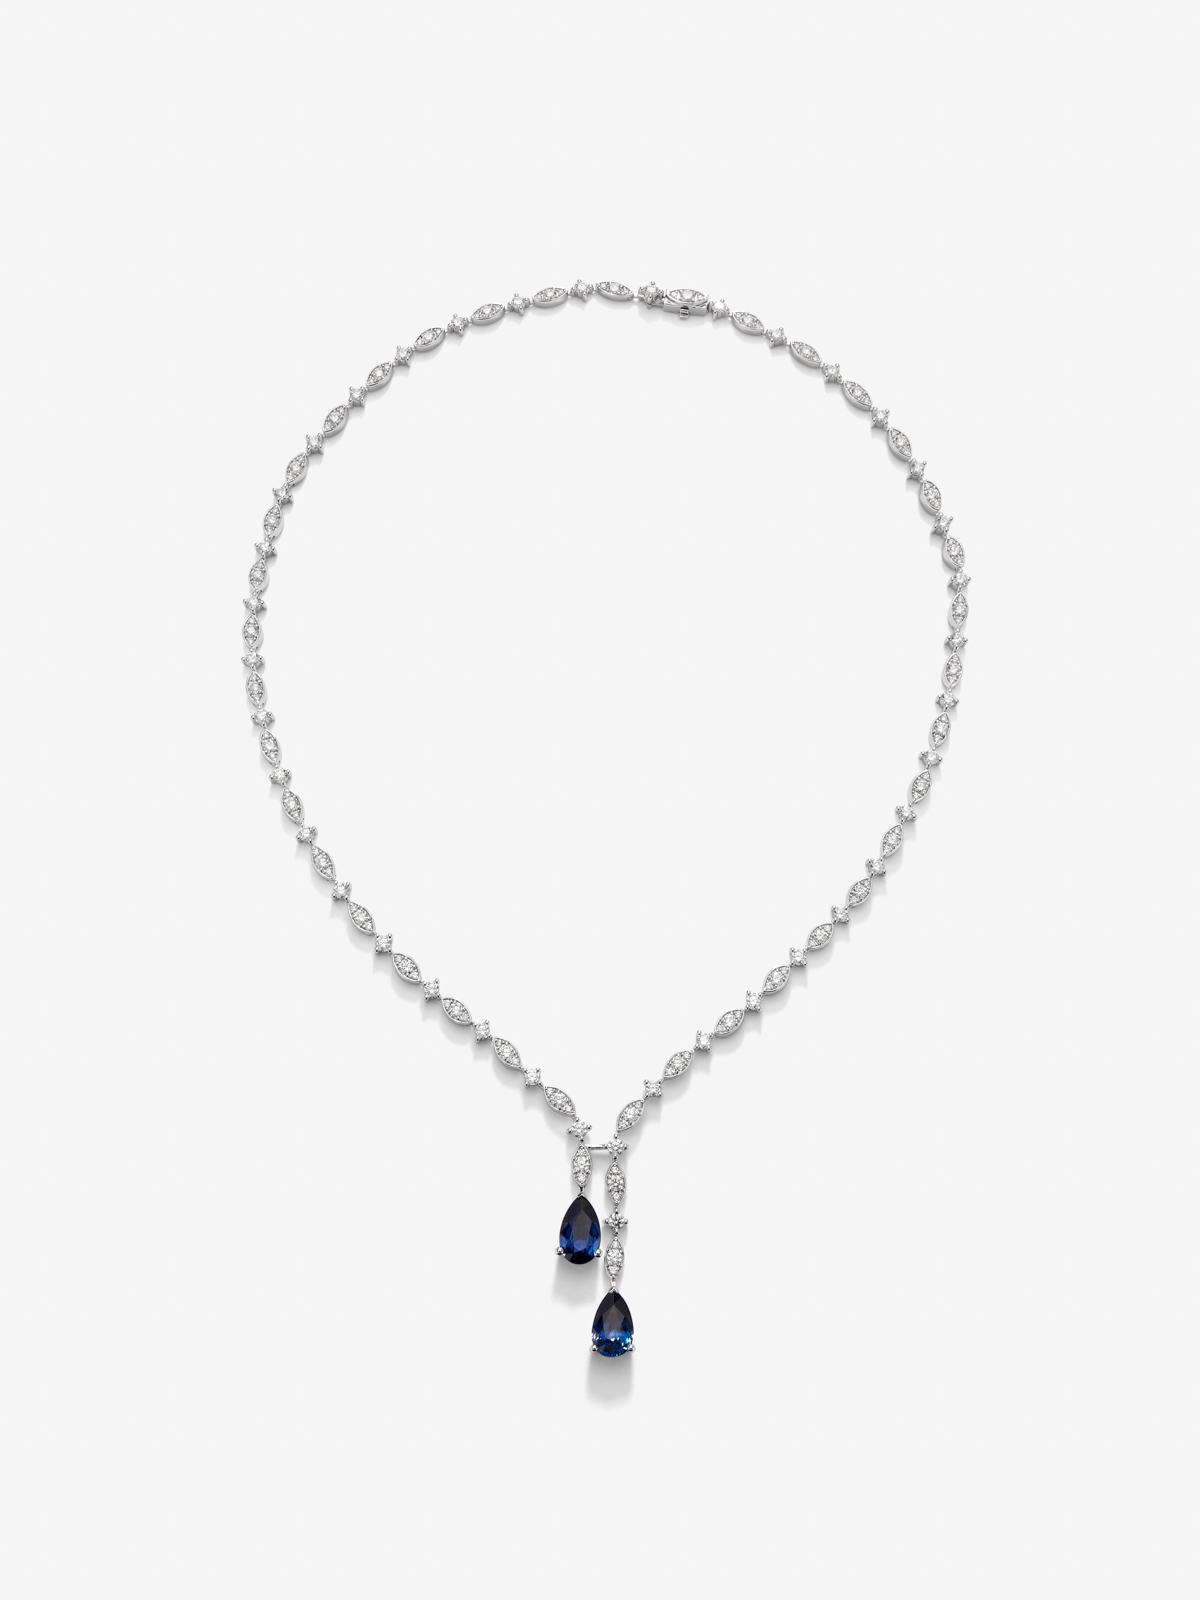 18K white gold necklace with intense blue zafiro in 1.76 cts pear size, emerald green in 0.96 cts and white diamonds in a bright size of 6.48 cts